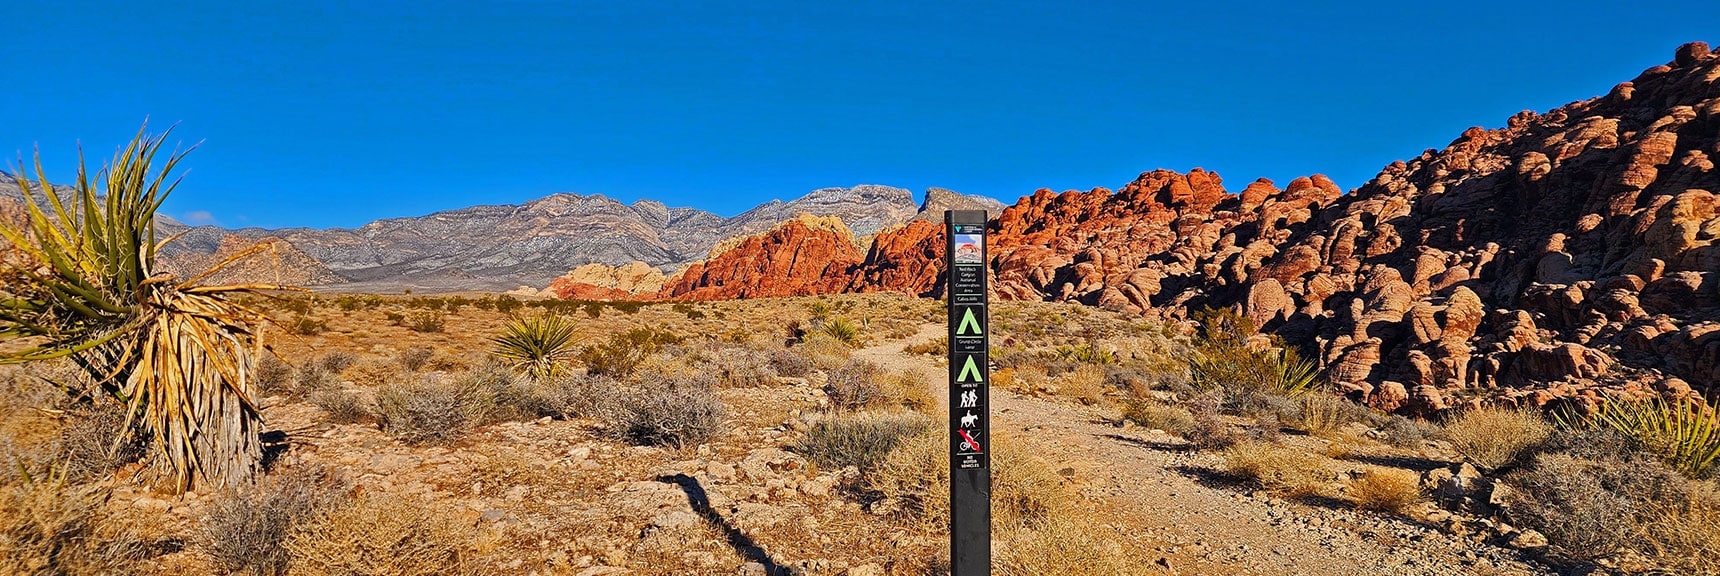 Top of Ridge, Connect with the Grand Circle Loop Trail | 3 Basin Circuit | Calico Basin, Brownstone Basin, Red Rock Canyon, Nevada